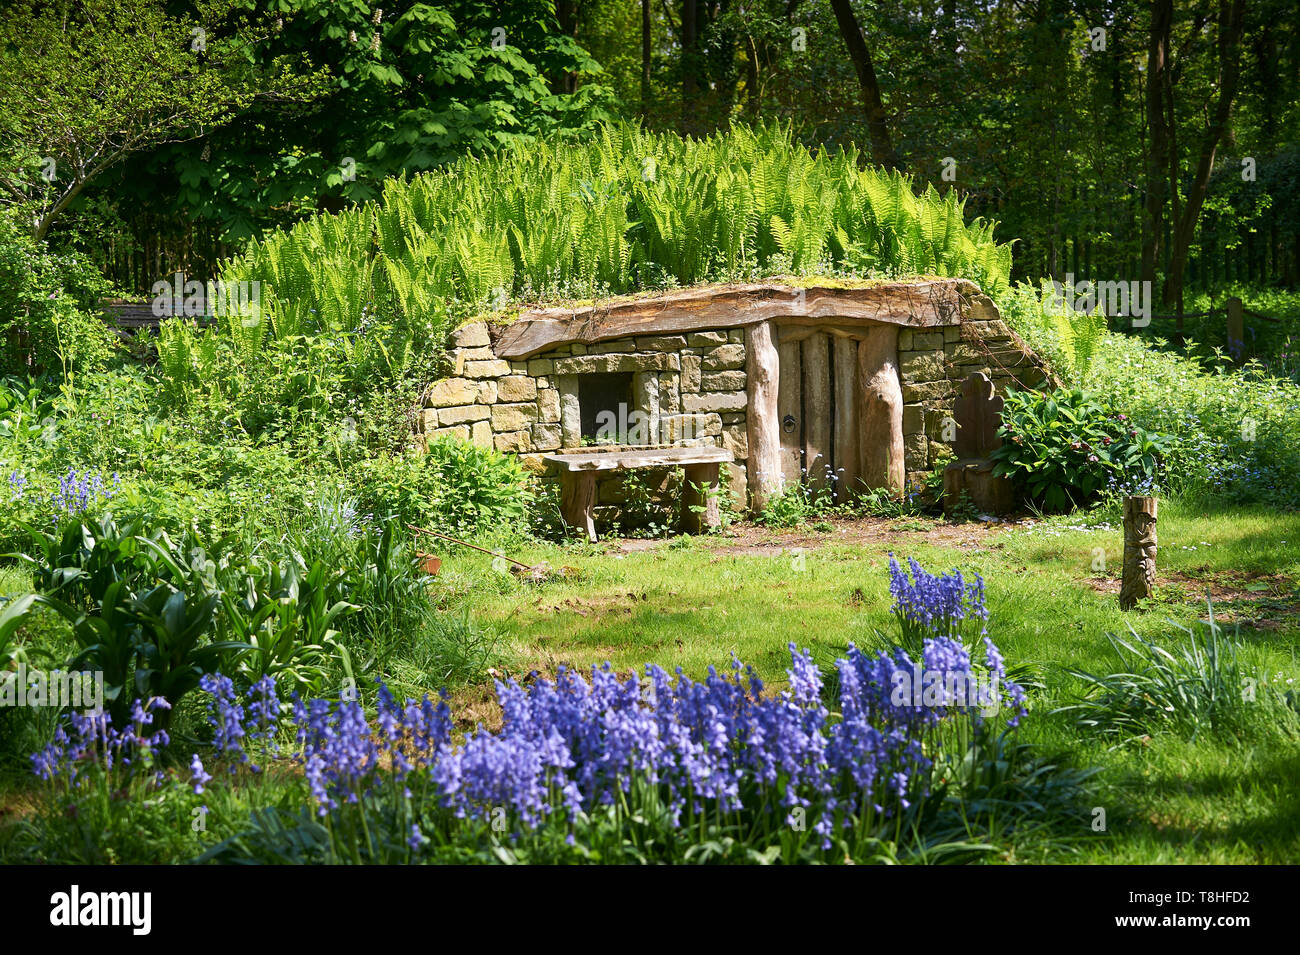 Hobbits House with springtime ferns and bluebells (Hyacinthoides non-scripta ) growing around it. East Riding of Yorkshire, UK, GB. Stock Photo